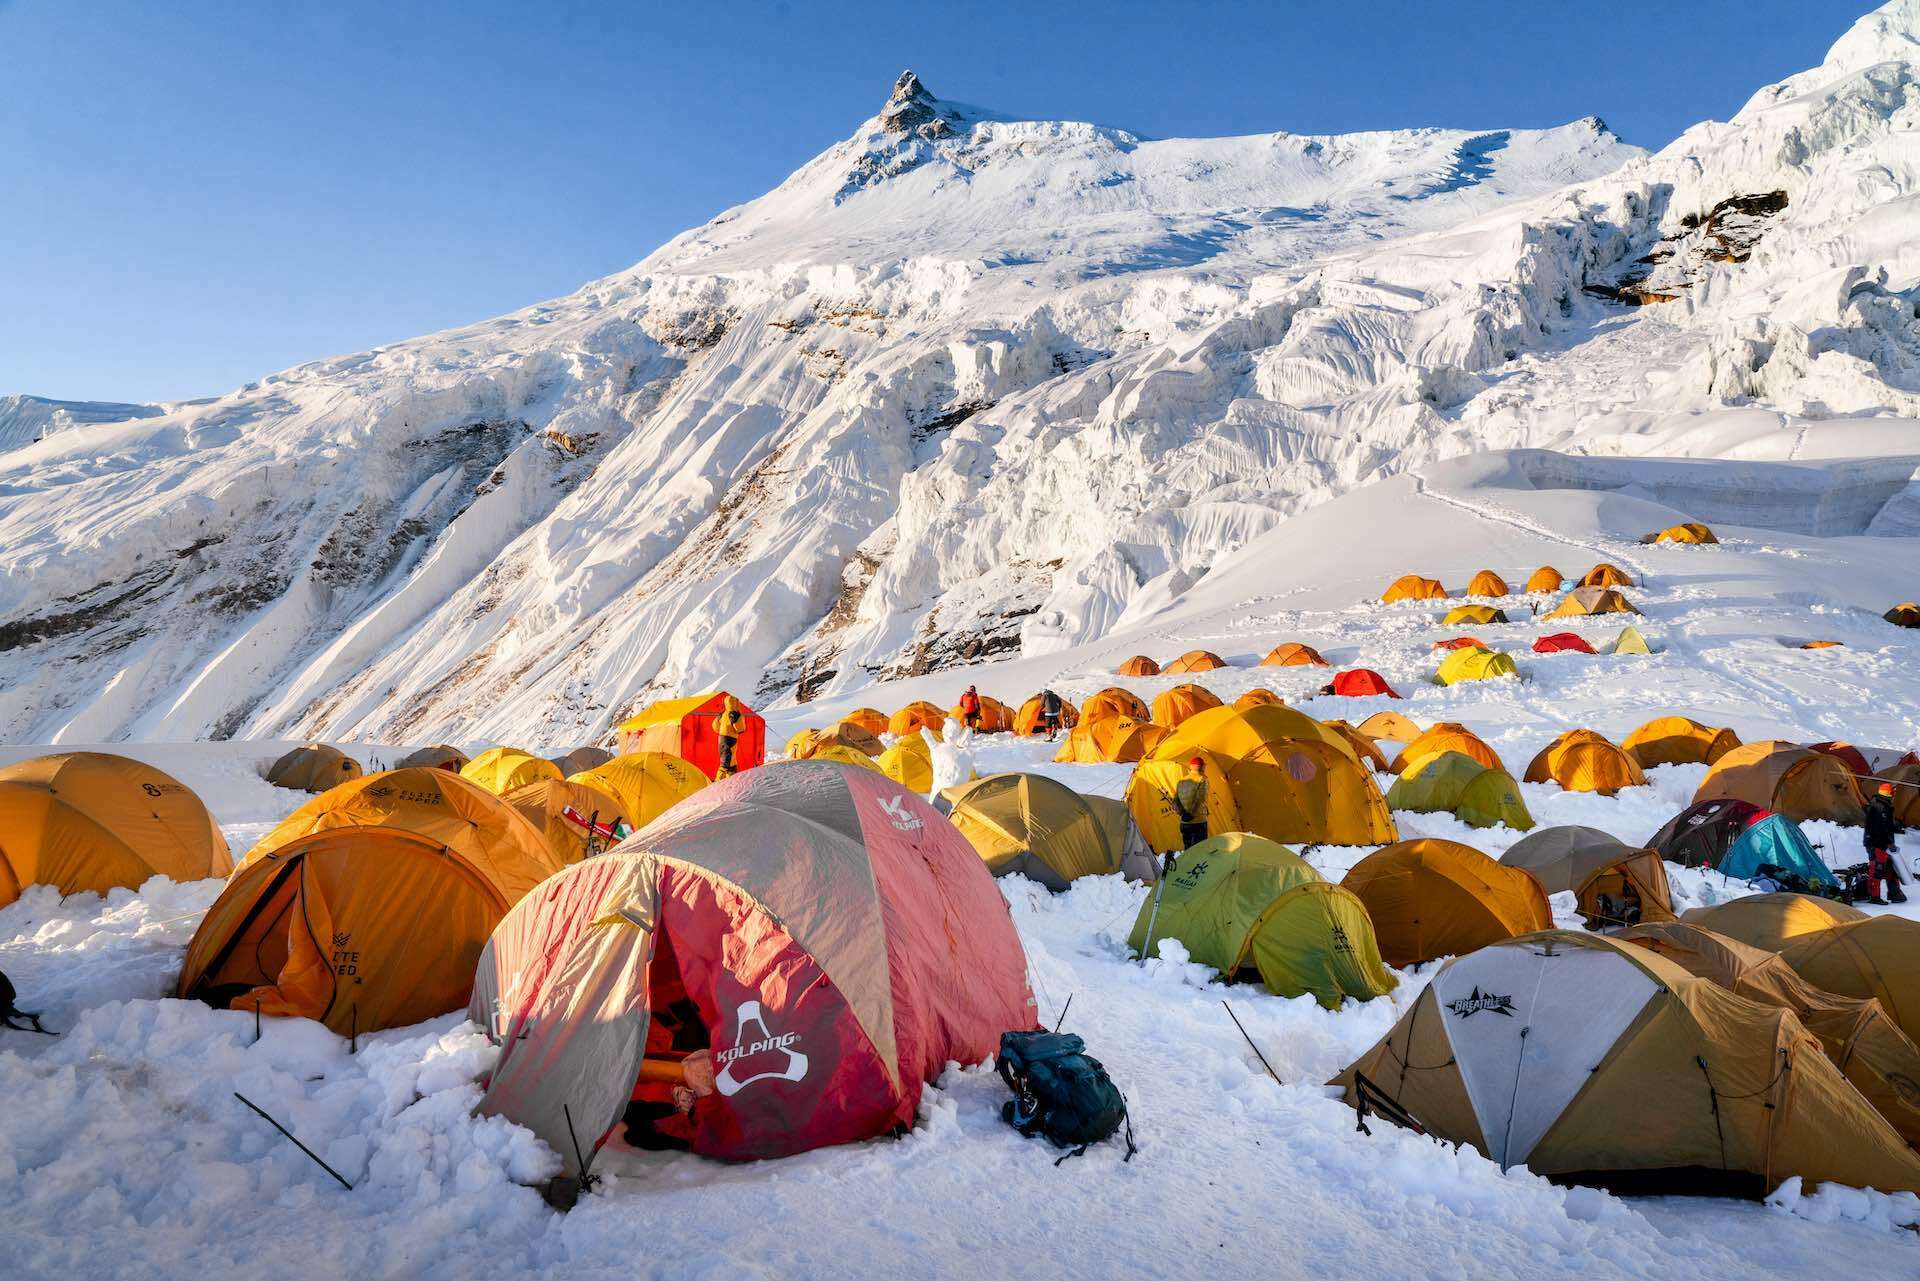 Stop What You're Doing and Look at These Photos of the Himalayas Right Now, Jackson Groves, Mount Manaslu, mountaineering, people, tent, snow